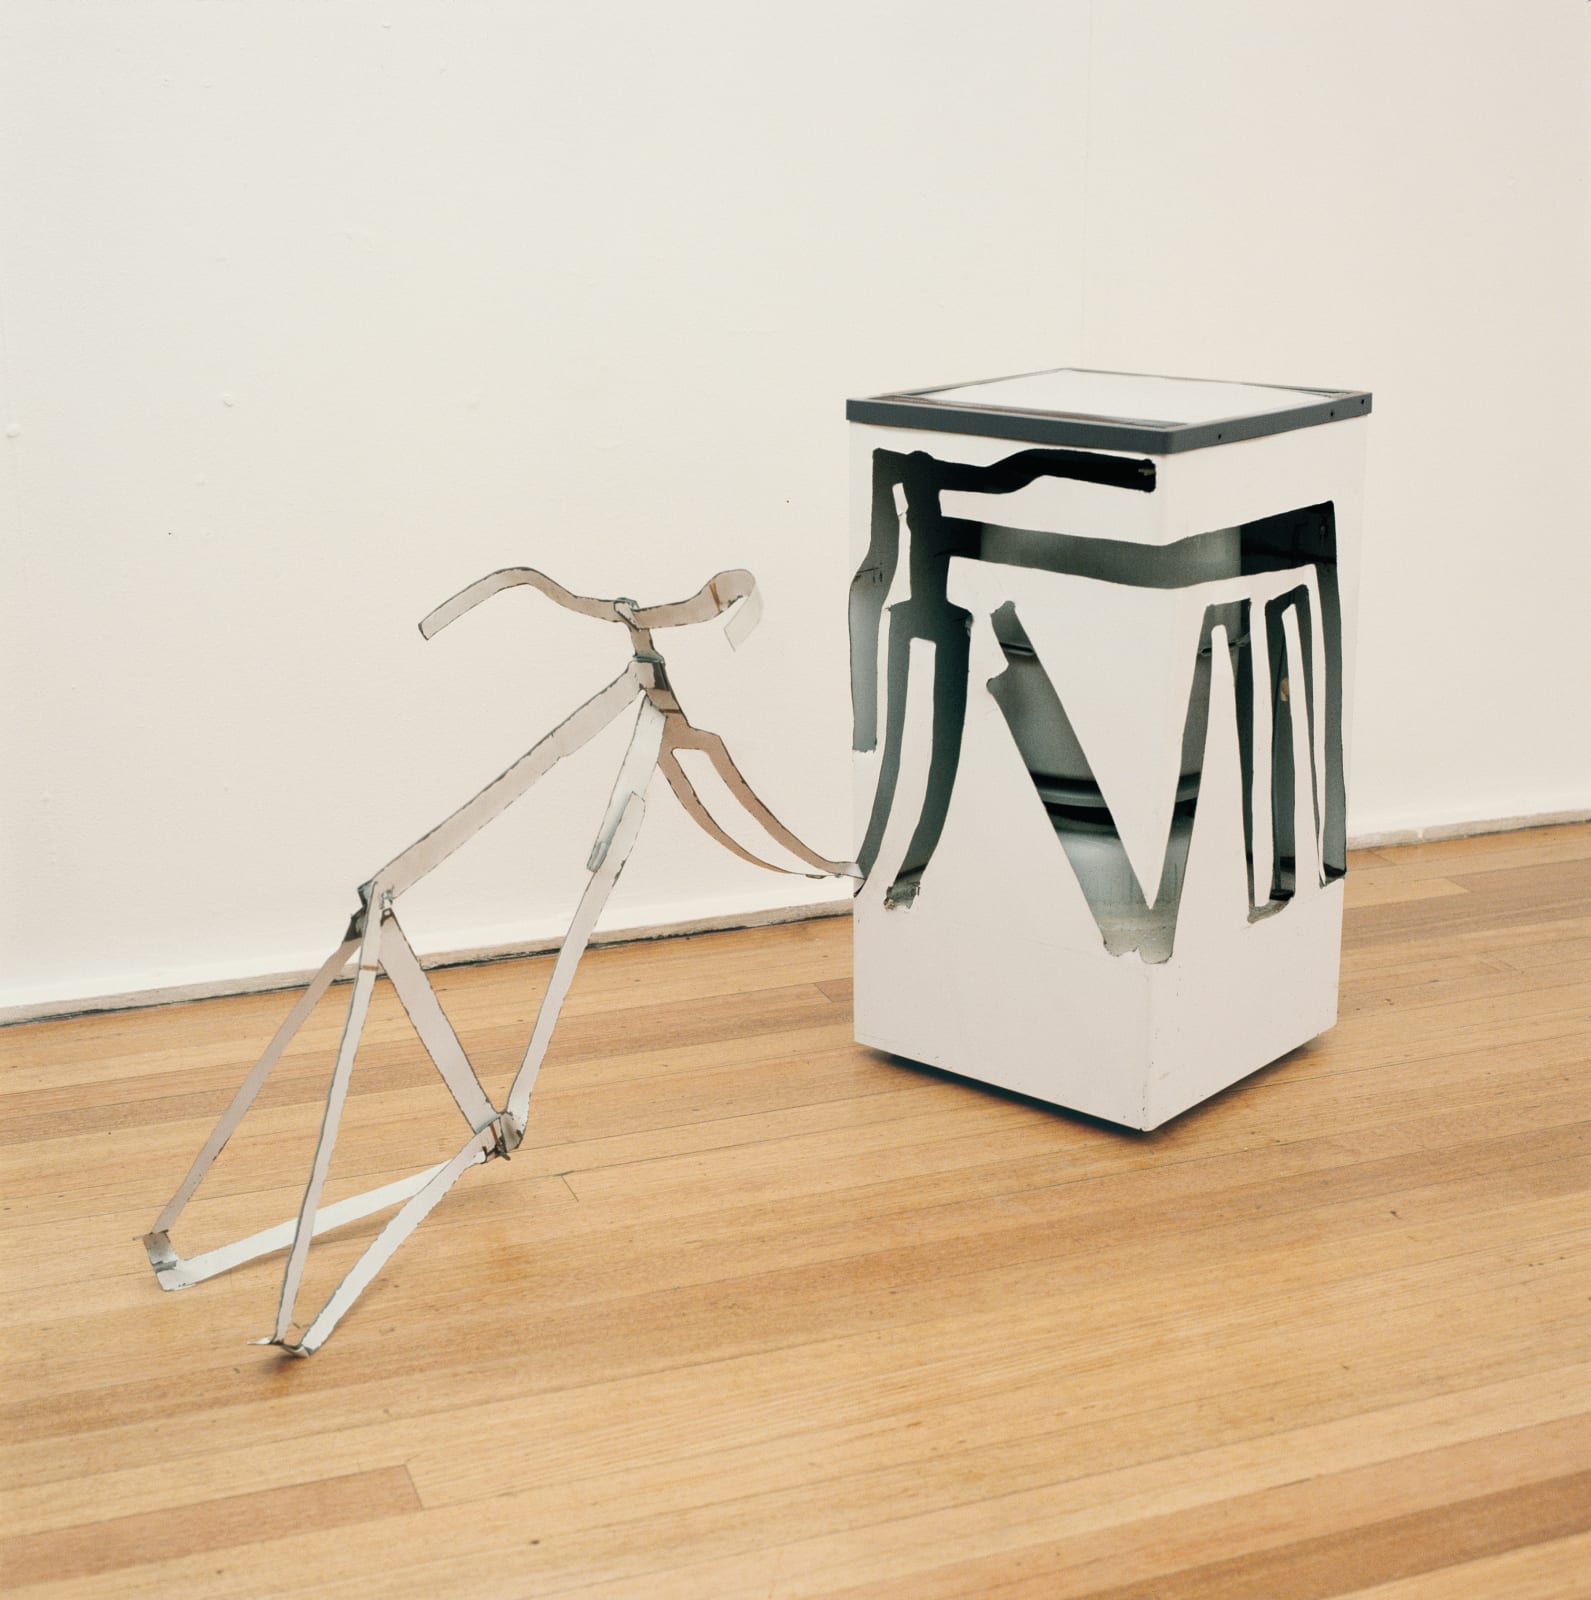 Bill Woodrow, Spin Dryer with Bicycle Frame including Handlebars, 1981